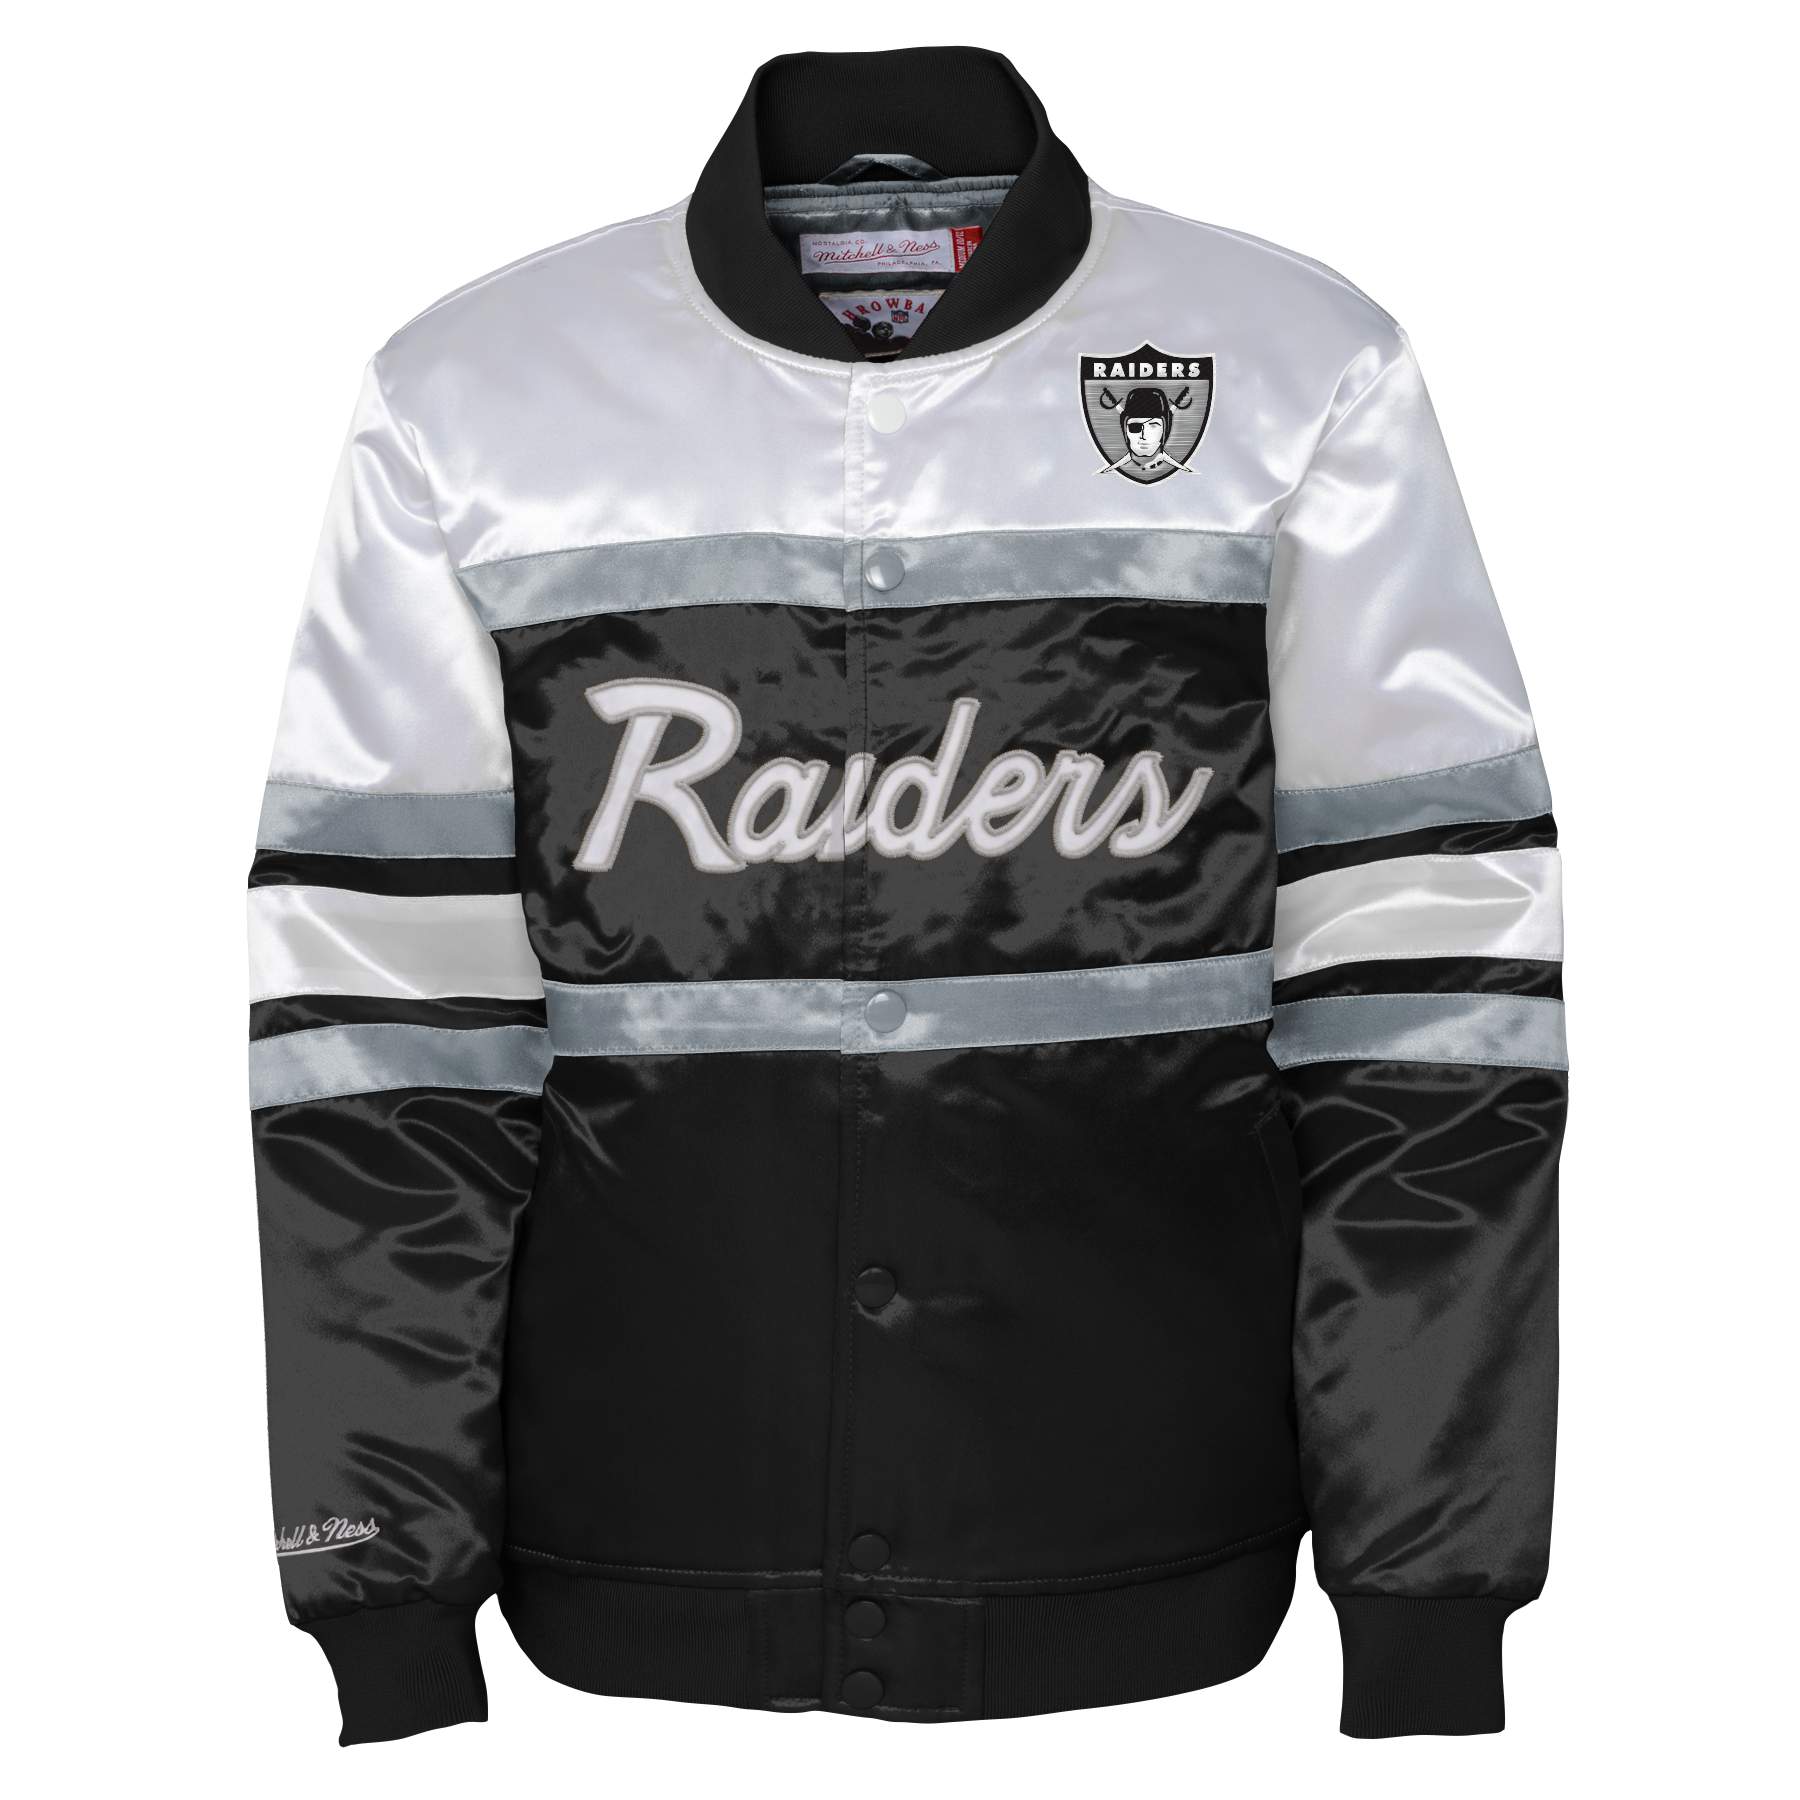 Mitchell and Ness LV Raiders M&N Special Script Heavyweight Satin Jacket  Black White